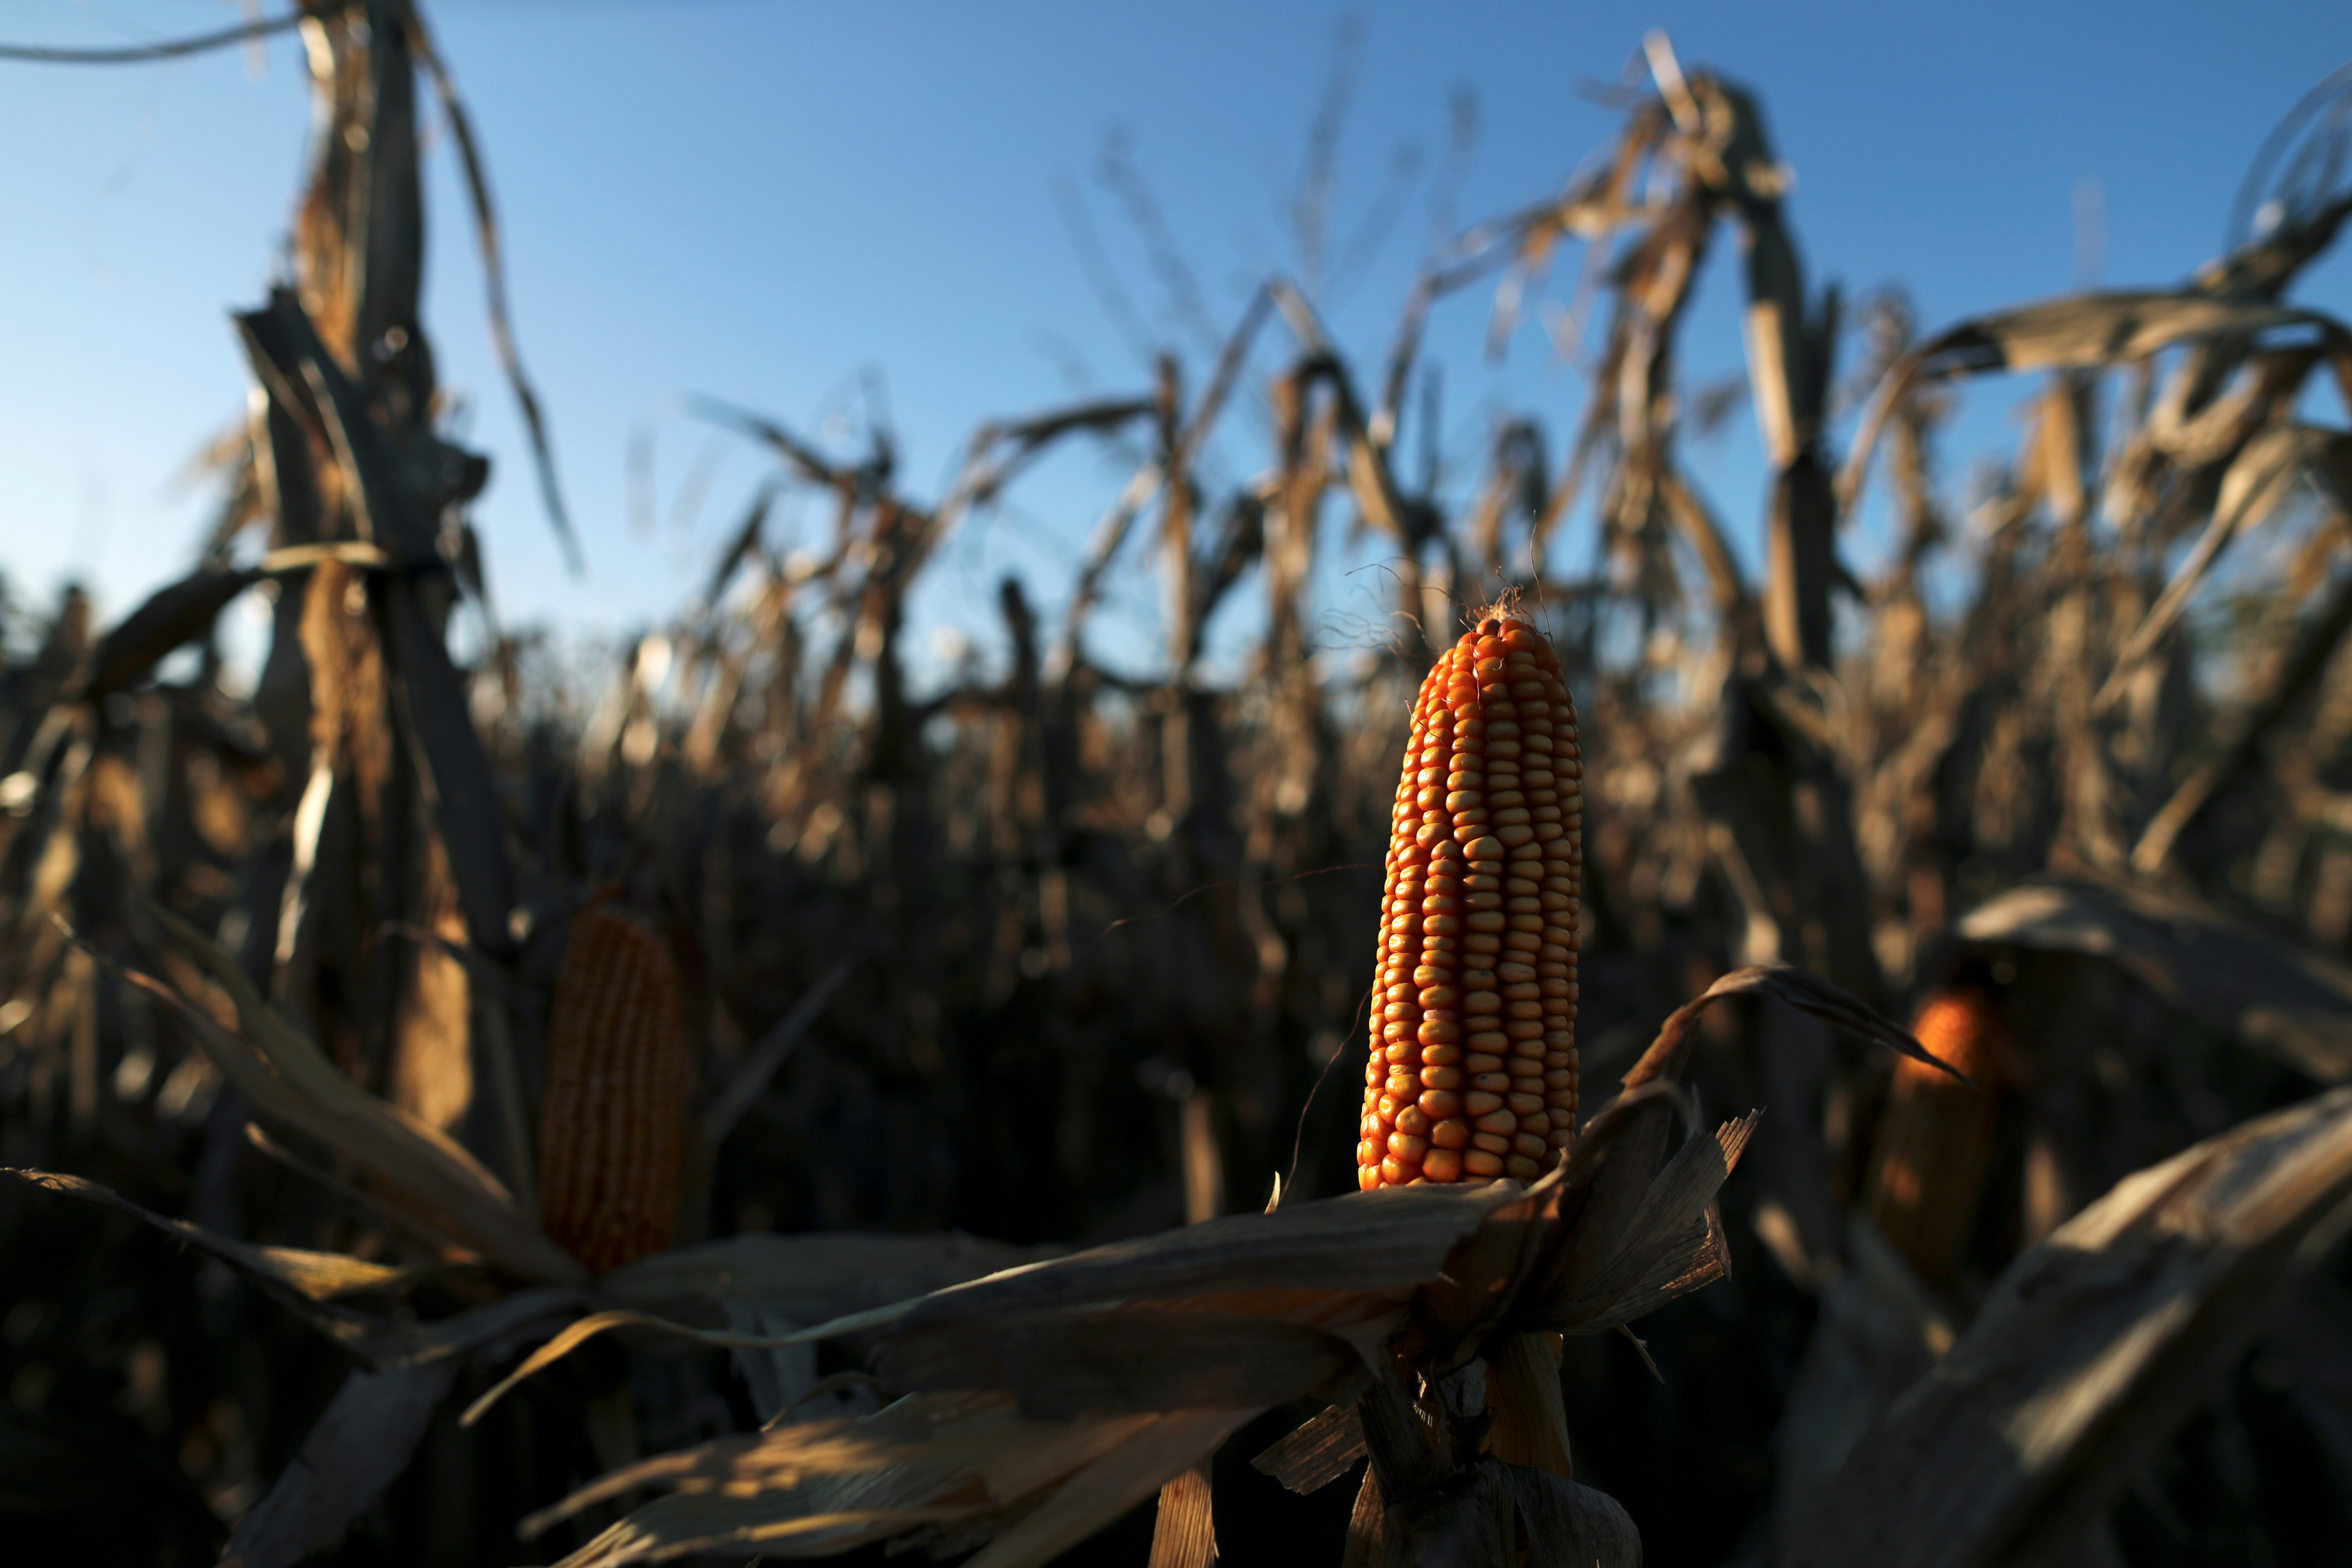 Corn plants are seen on a farmland in Chivilcoy, on the outskirts of Buenos Aires